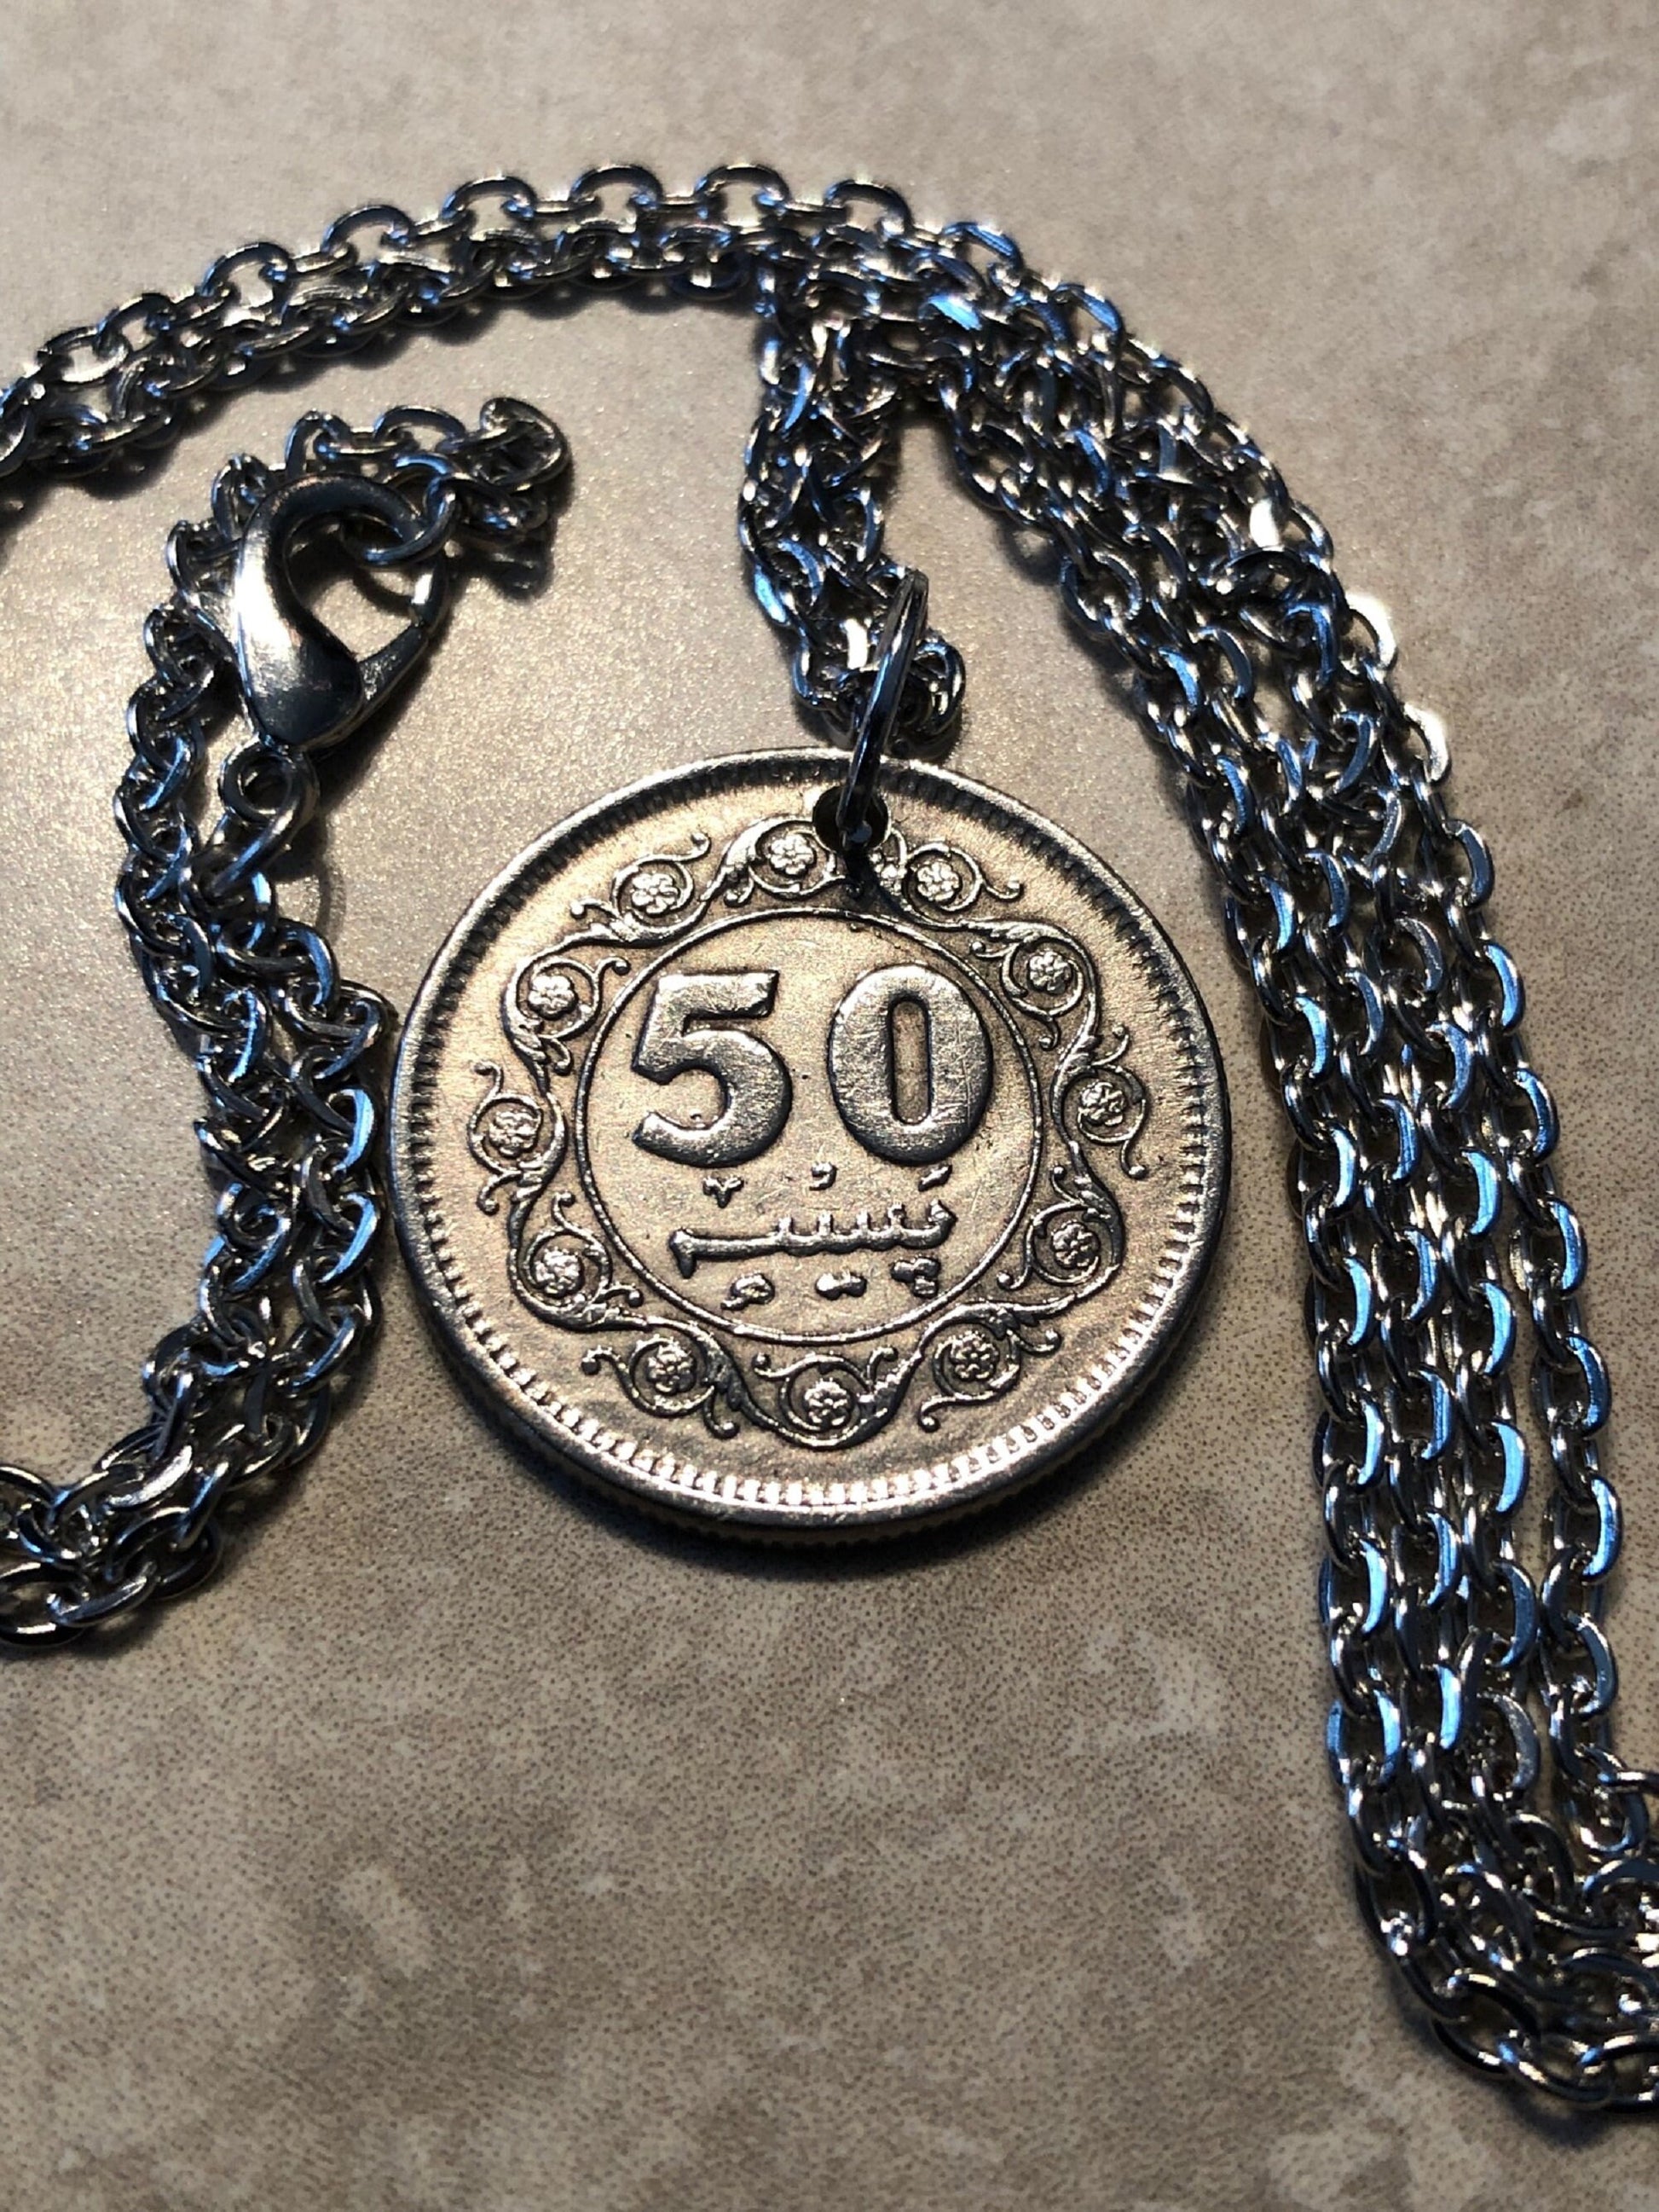 Pakistan Coin Pendant Necklace Pakistani 50 Paisa Personal Old Vintage Handmade Jewelry Gift Friend Charm For Him Her World Coin Collector